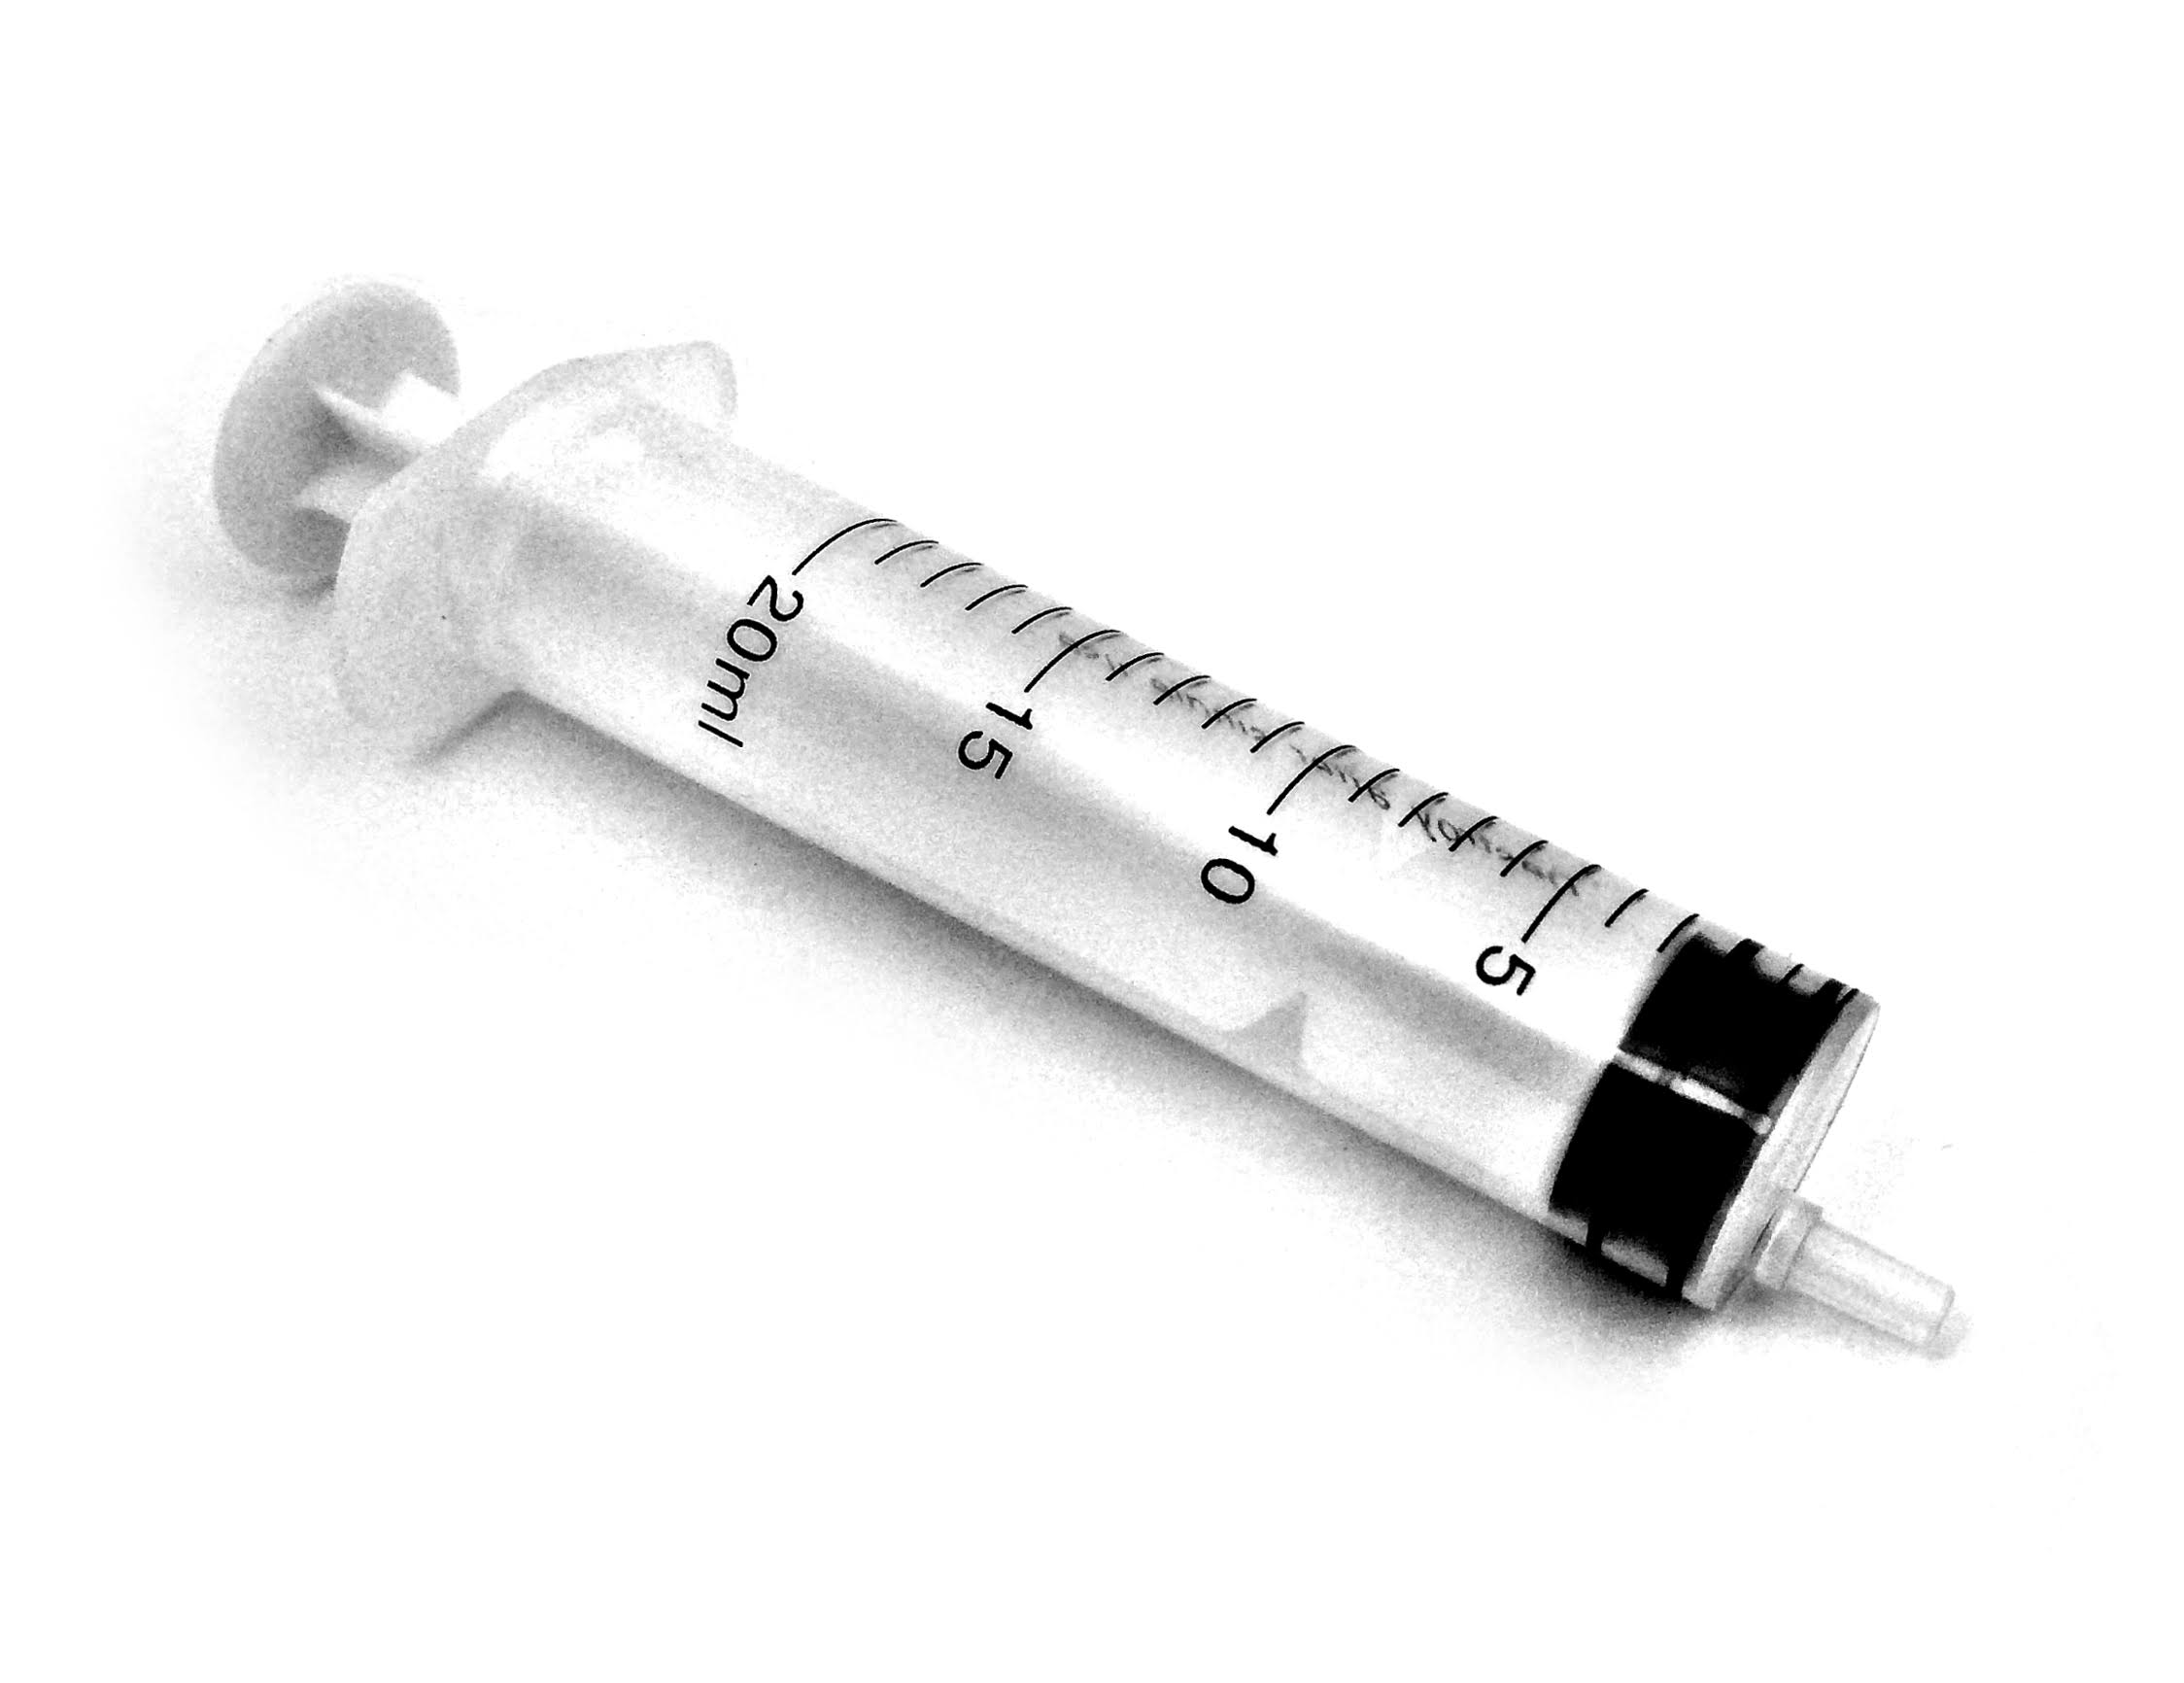 Toolusa Disposable Syringe with 20 ml Capacity